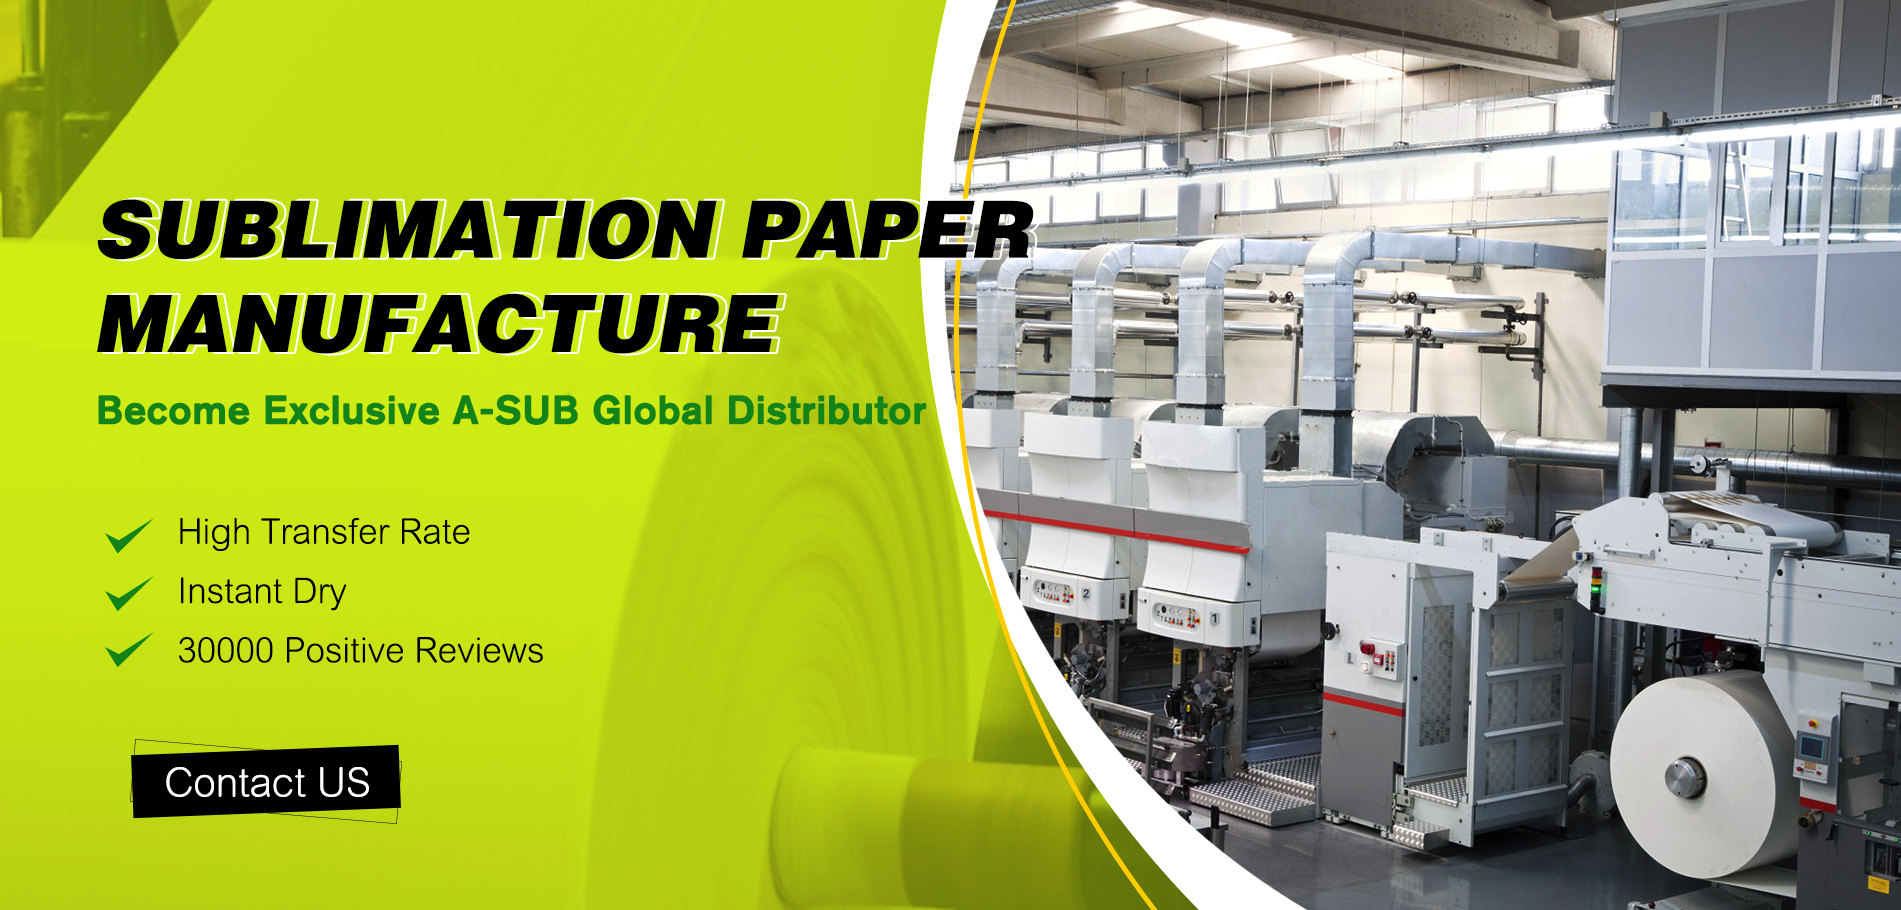 To be A-SUB Sublimation Brand Distributor